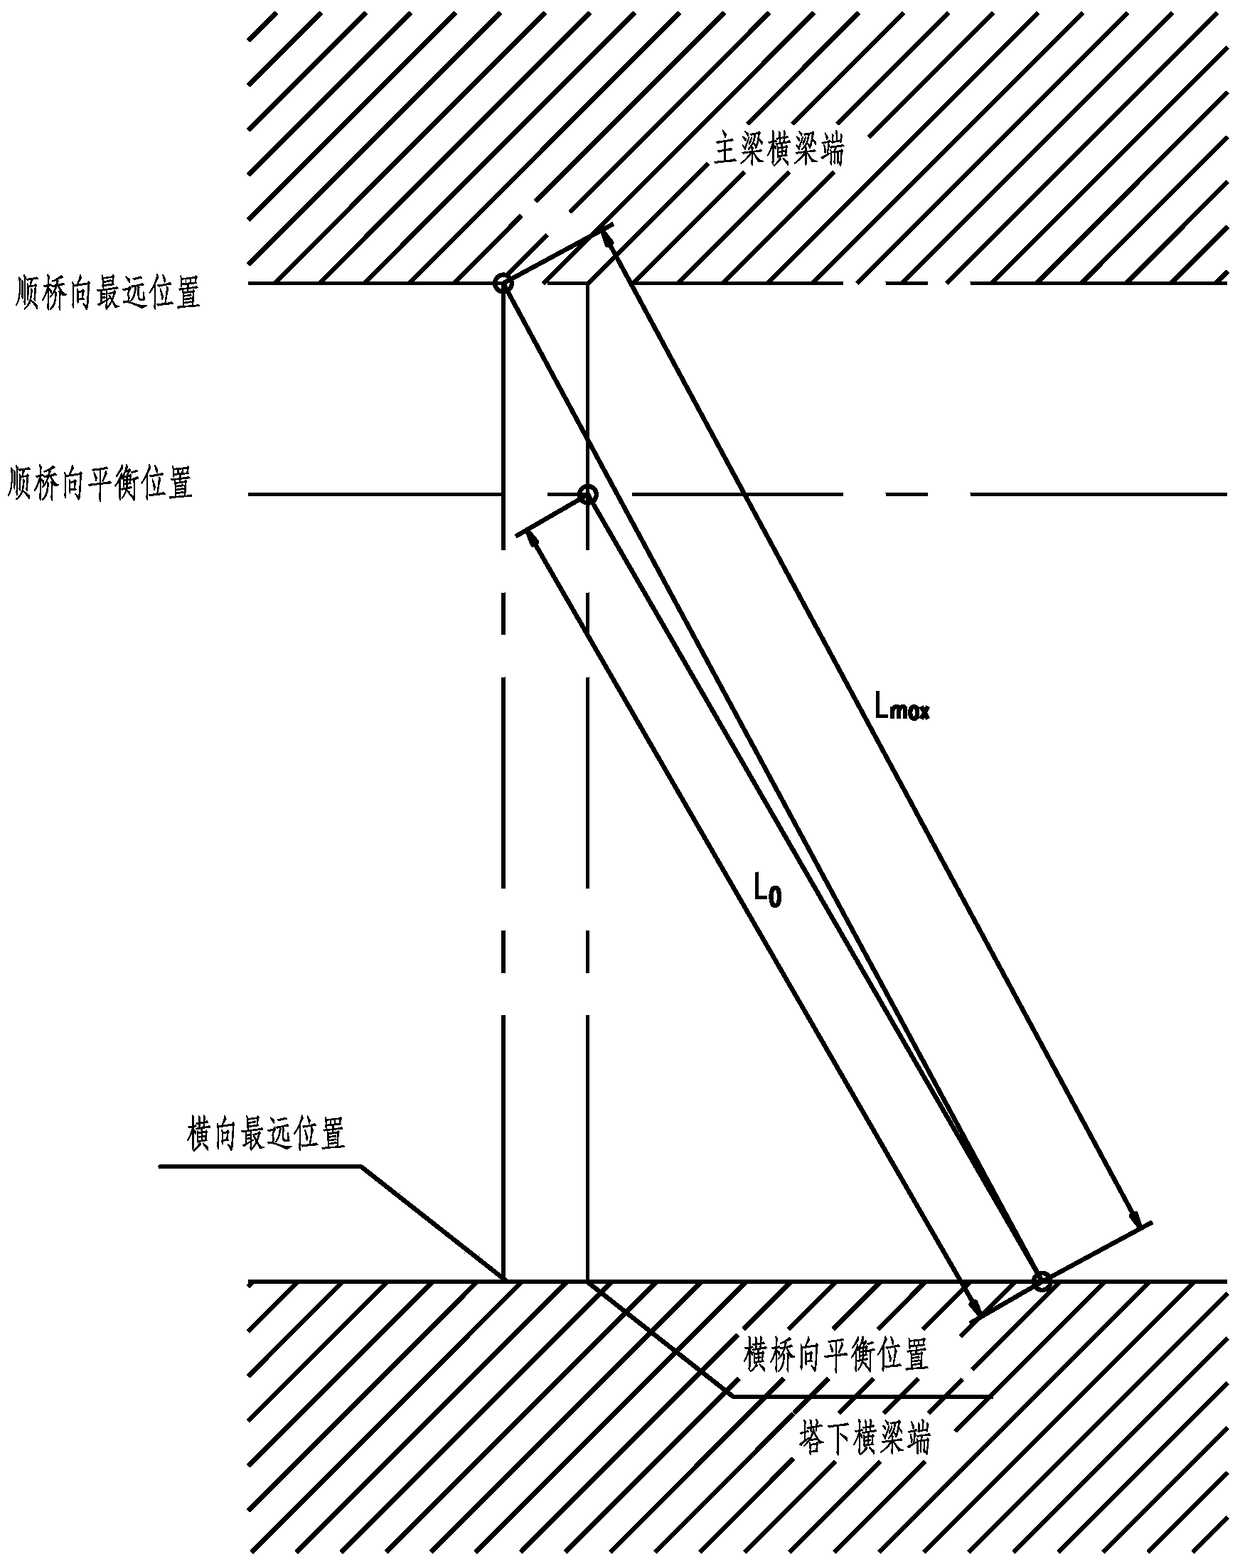 An inclined bridge seismic damper and its parameter optimization method